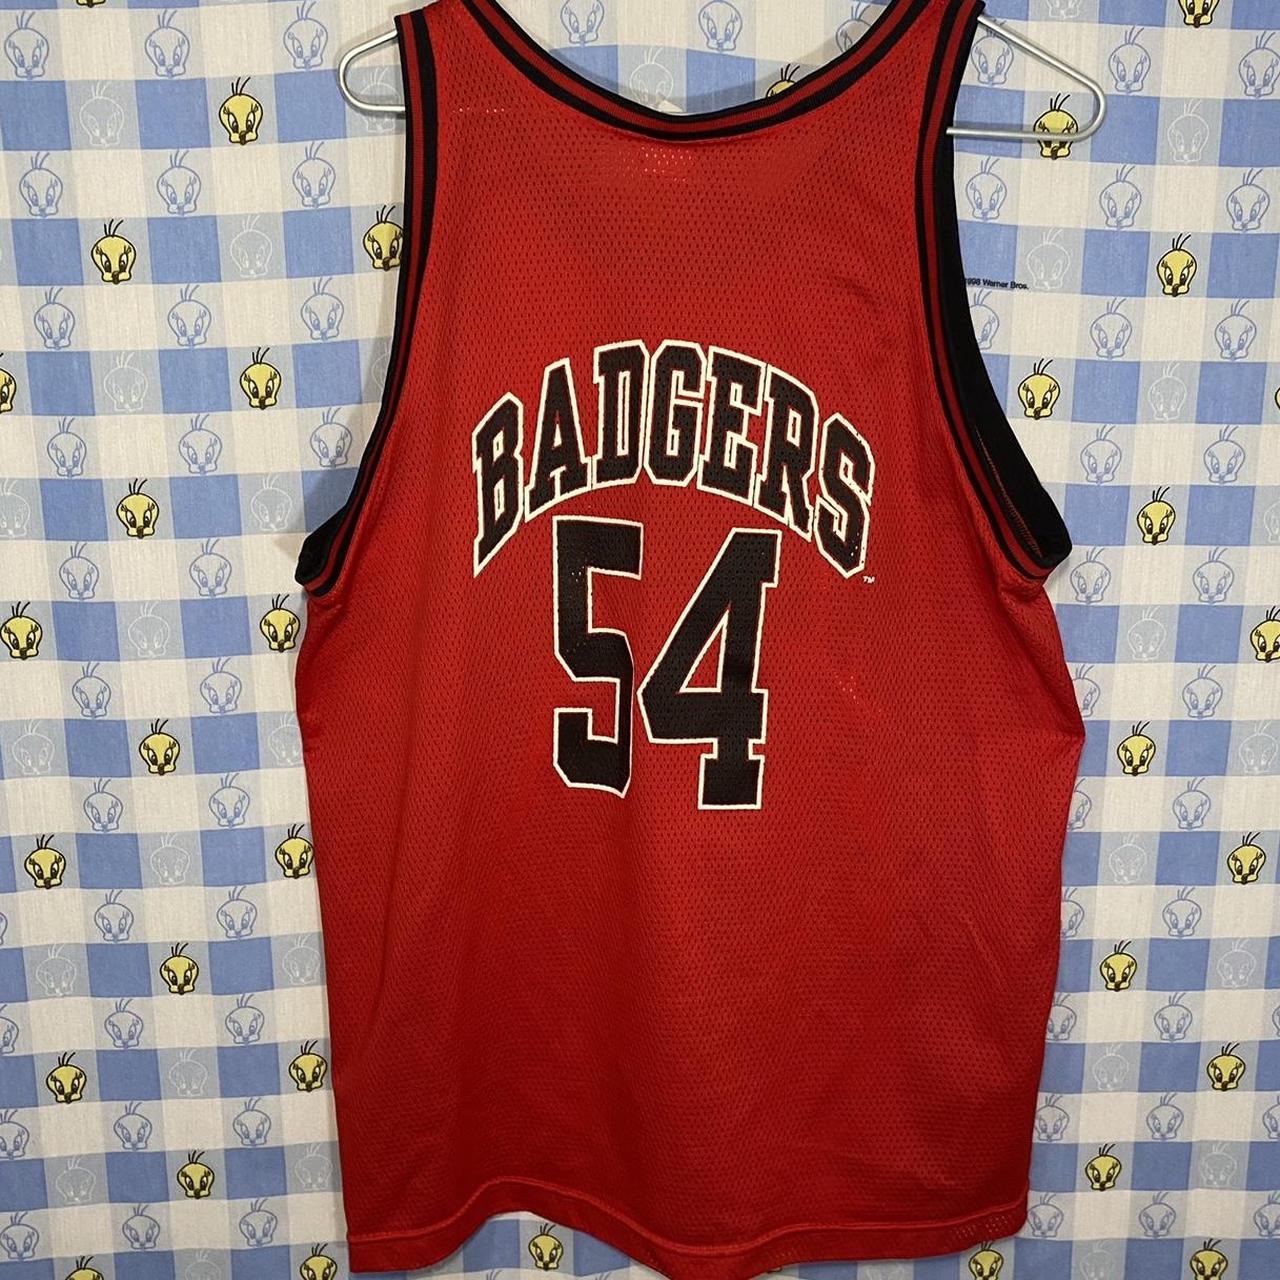 Product Image 2 - Wisconsin Badgers basketball jersey
Red Black,